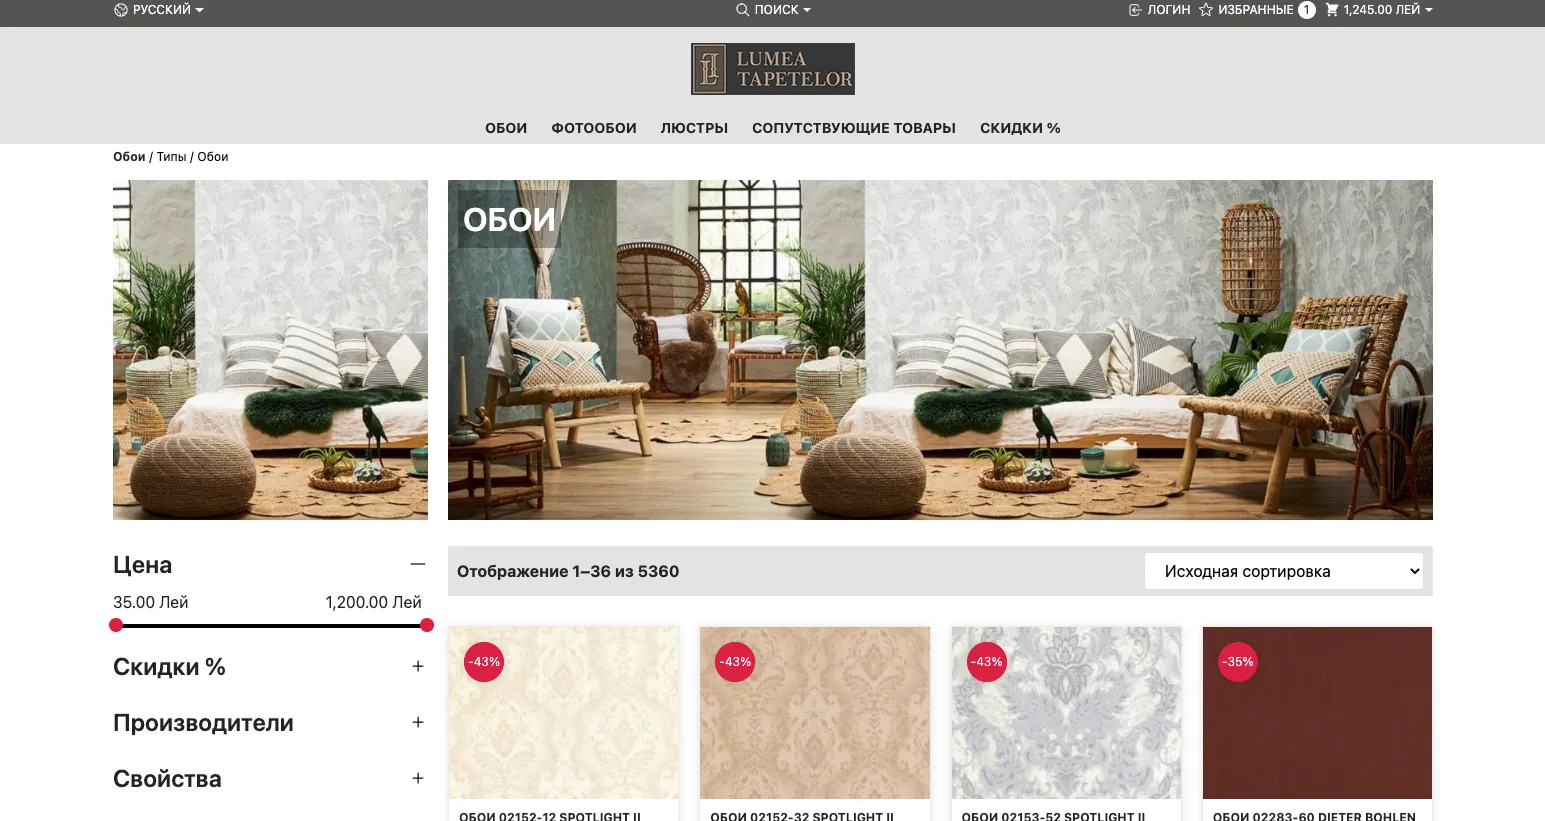 Redesign of the Lumea Tapetelor 13 online store